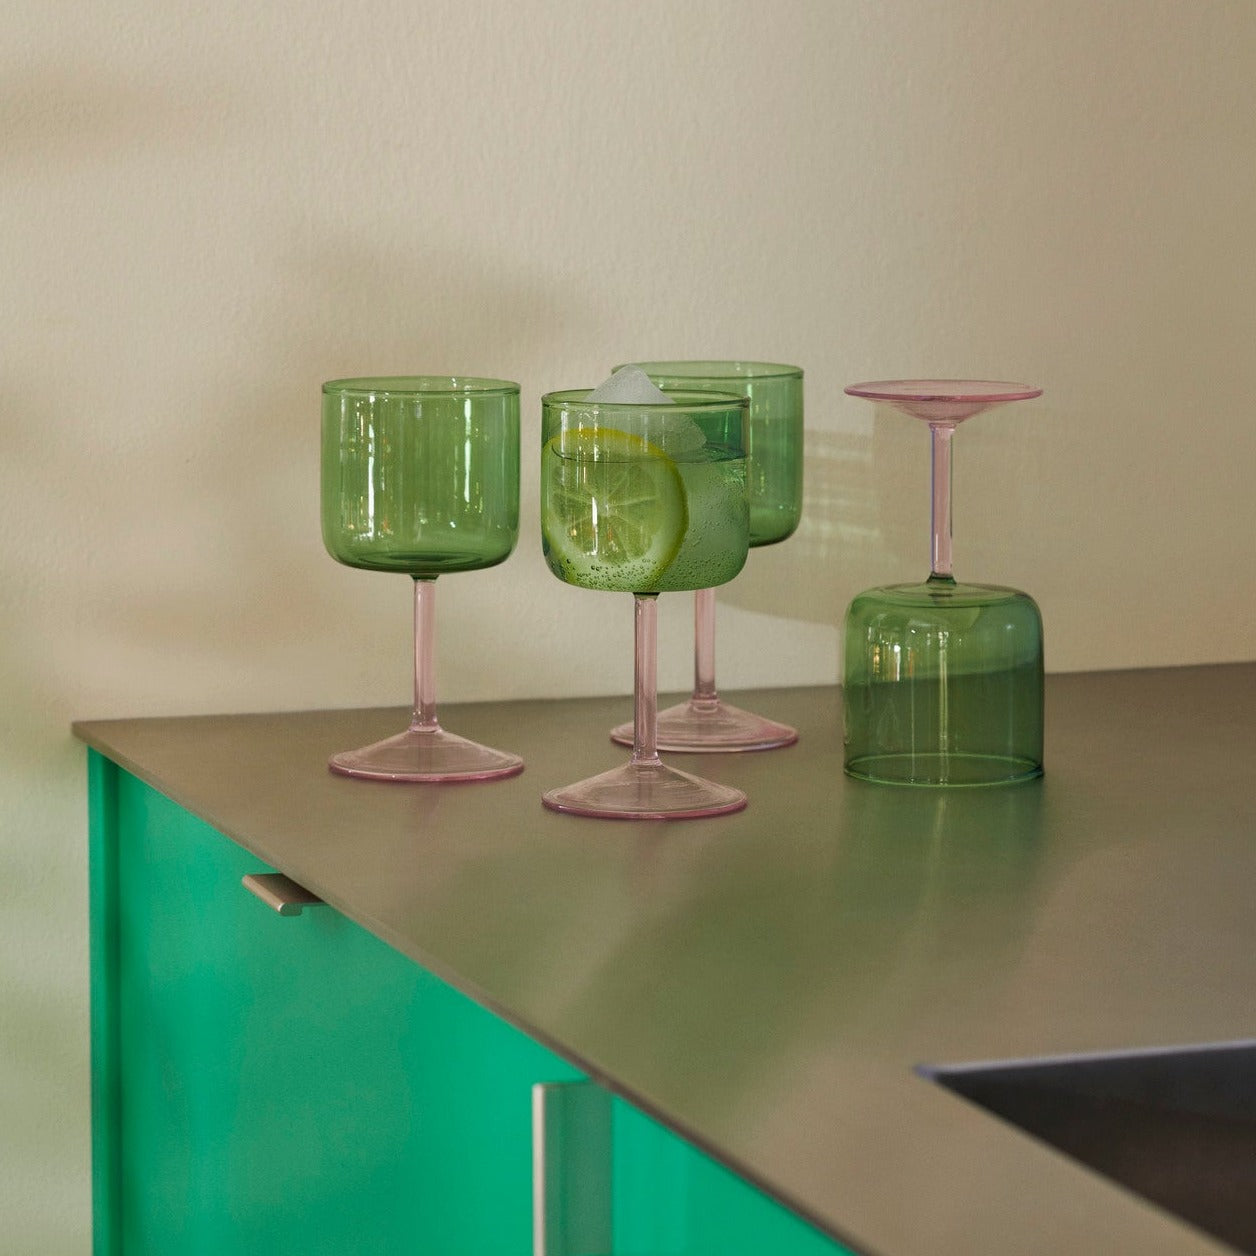 Tint Wine Glass Set of 2 - Green and Pink